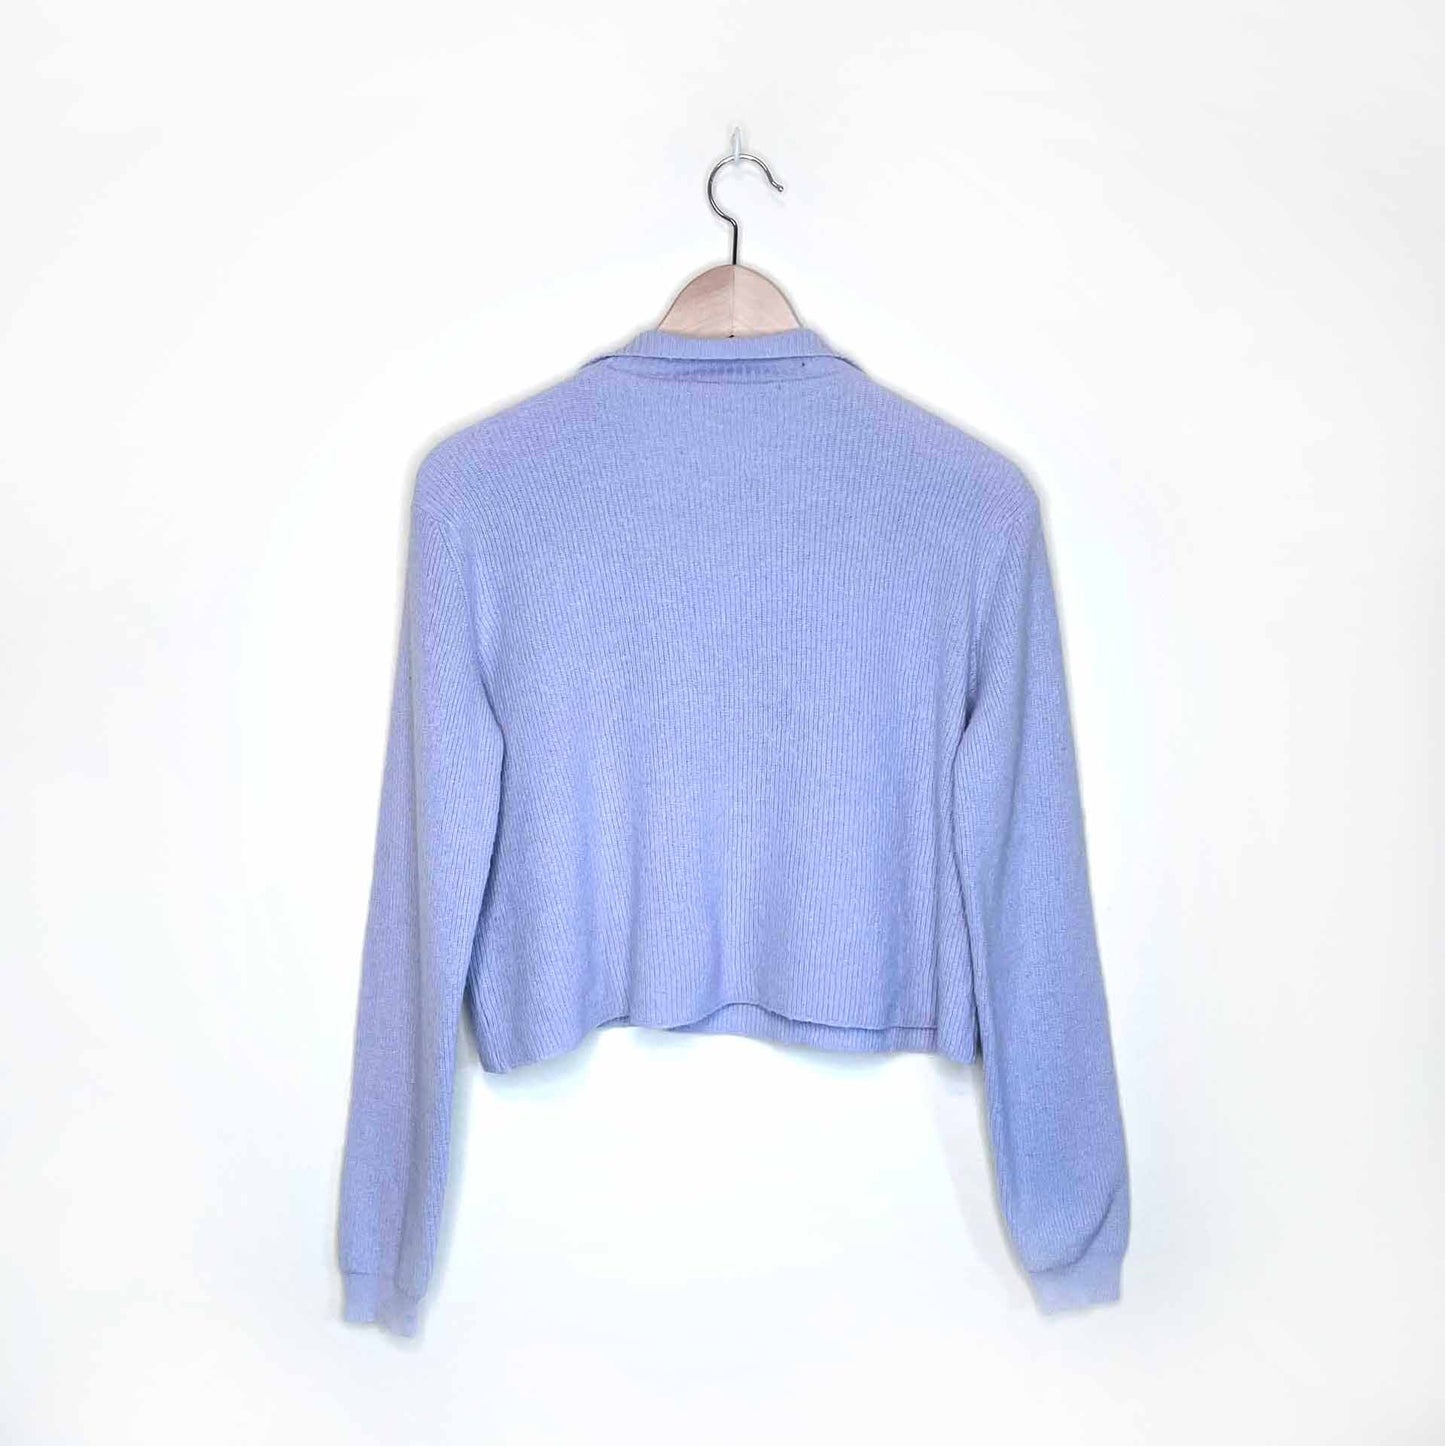 brandy melville cropped 1/4 zip natalie sweater - size small